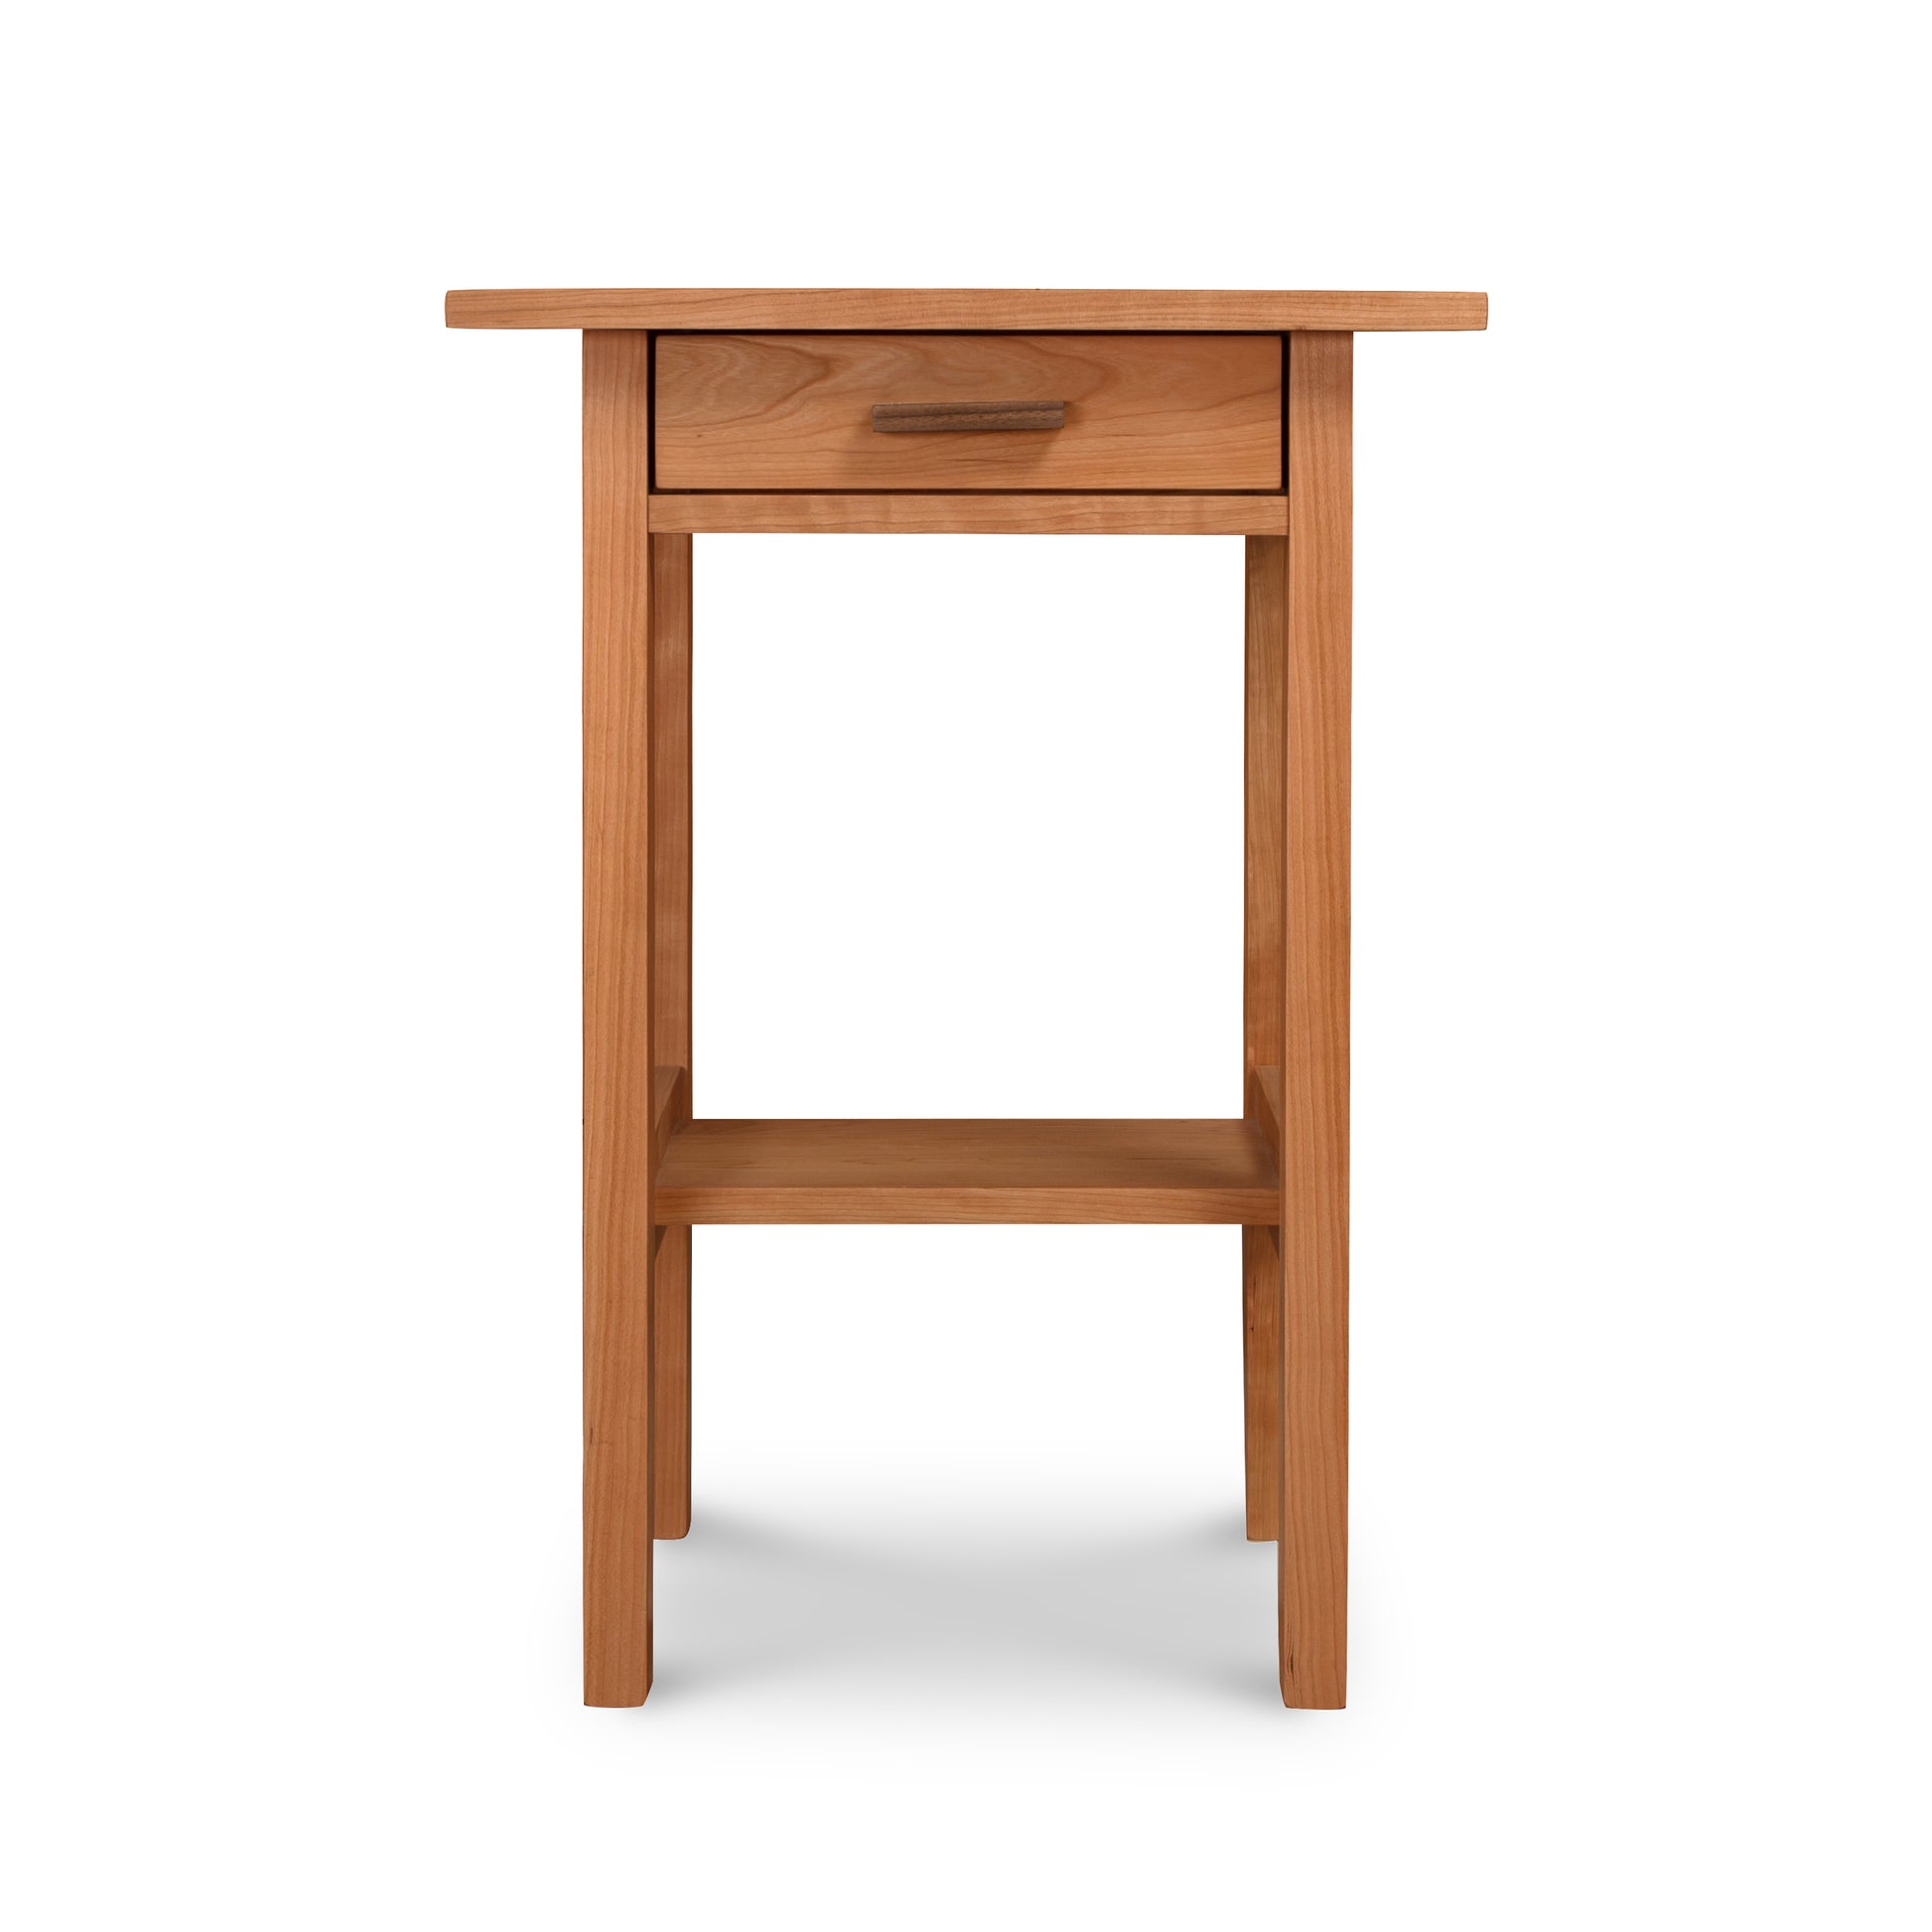 A Modern Craftsman 1-Drawer Open Shelf Nightstand by Vermont Furniture Designs, standing against a white background and showcasing natural wood construction.